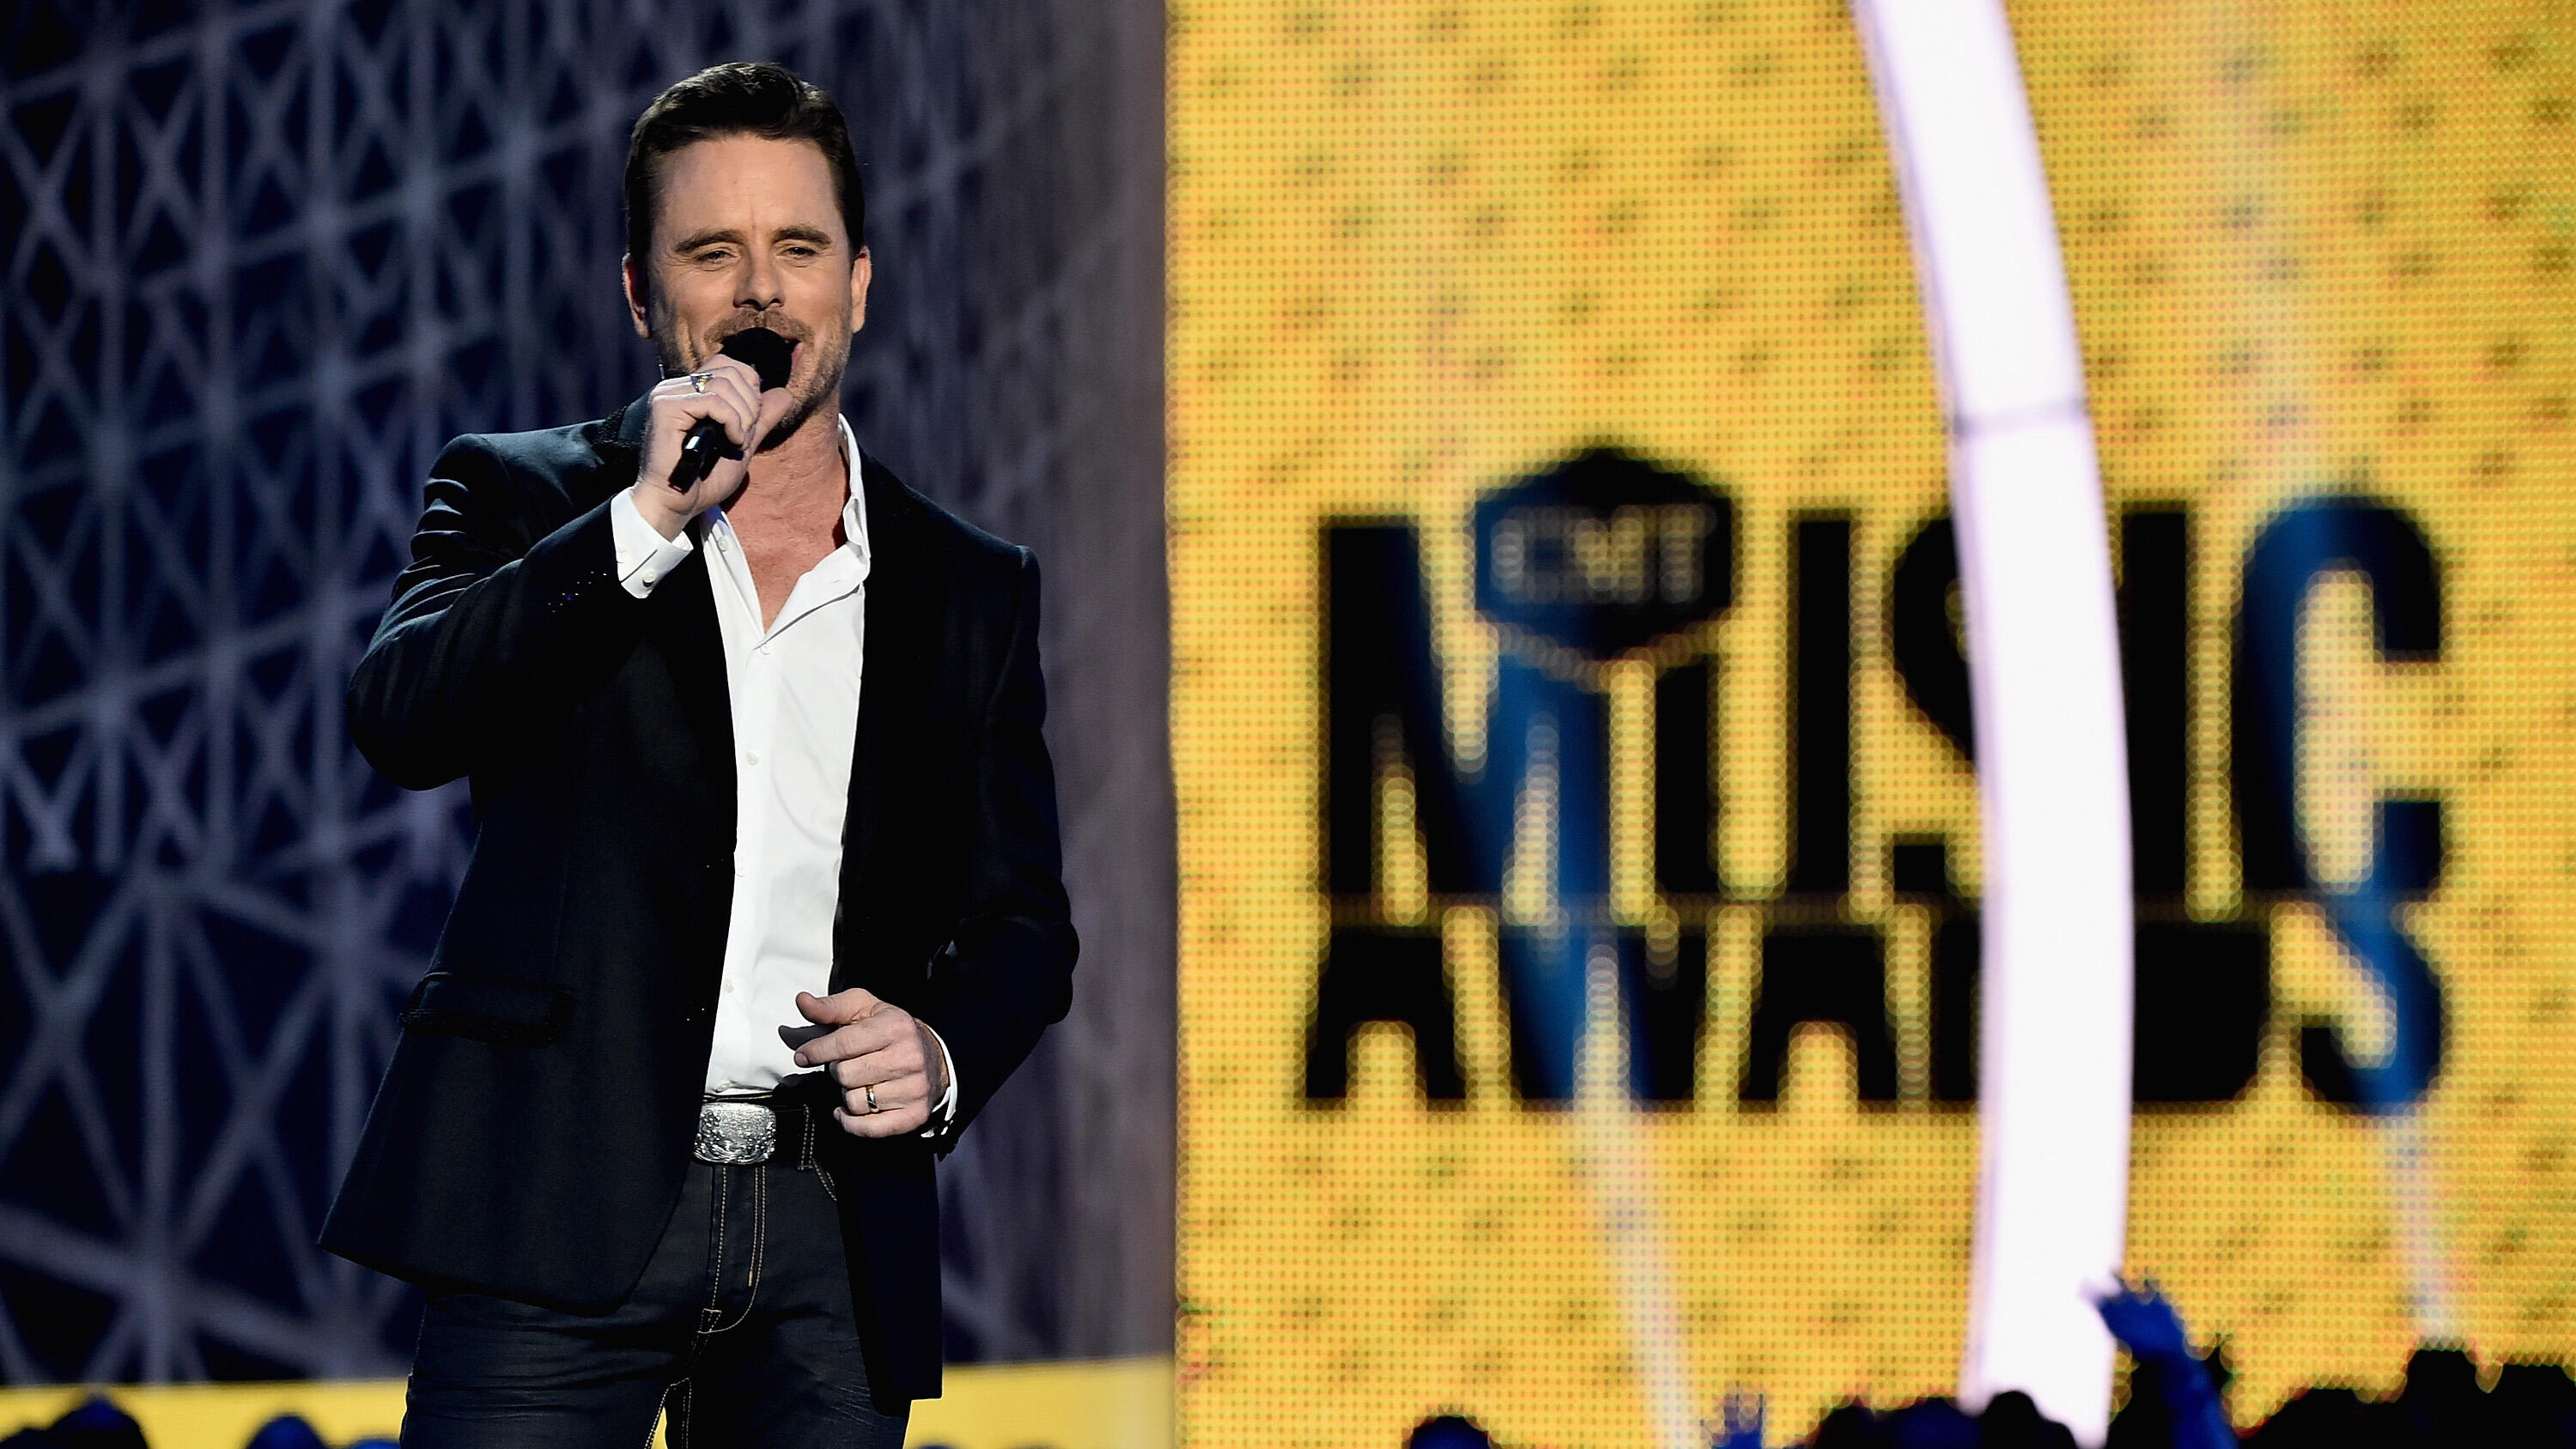 NASHVILLE, TN - JUNE 07:  Host Charles Esten speaks onstage during the 2017 CMT Music Awards at the Music City Center on June 6, 2017 in Nashville, Tennessee.  (Photo by Michael Loccisano/Getty Images for CMT)